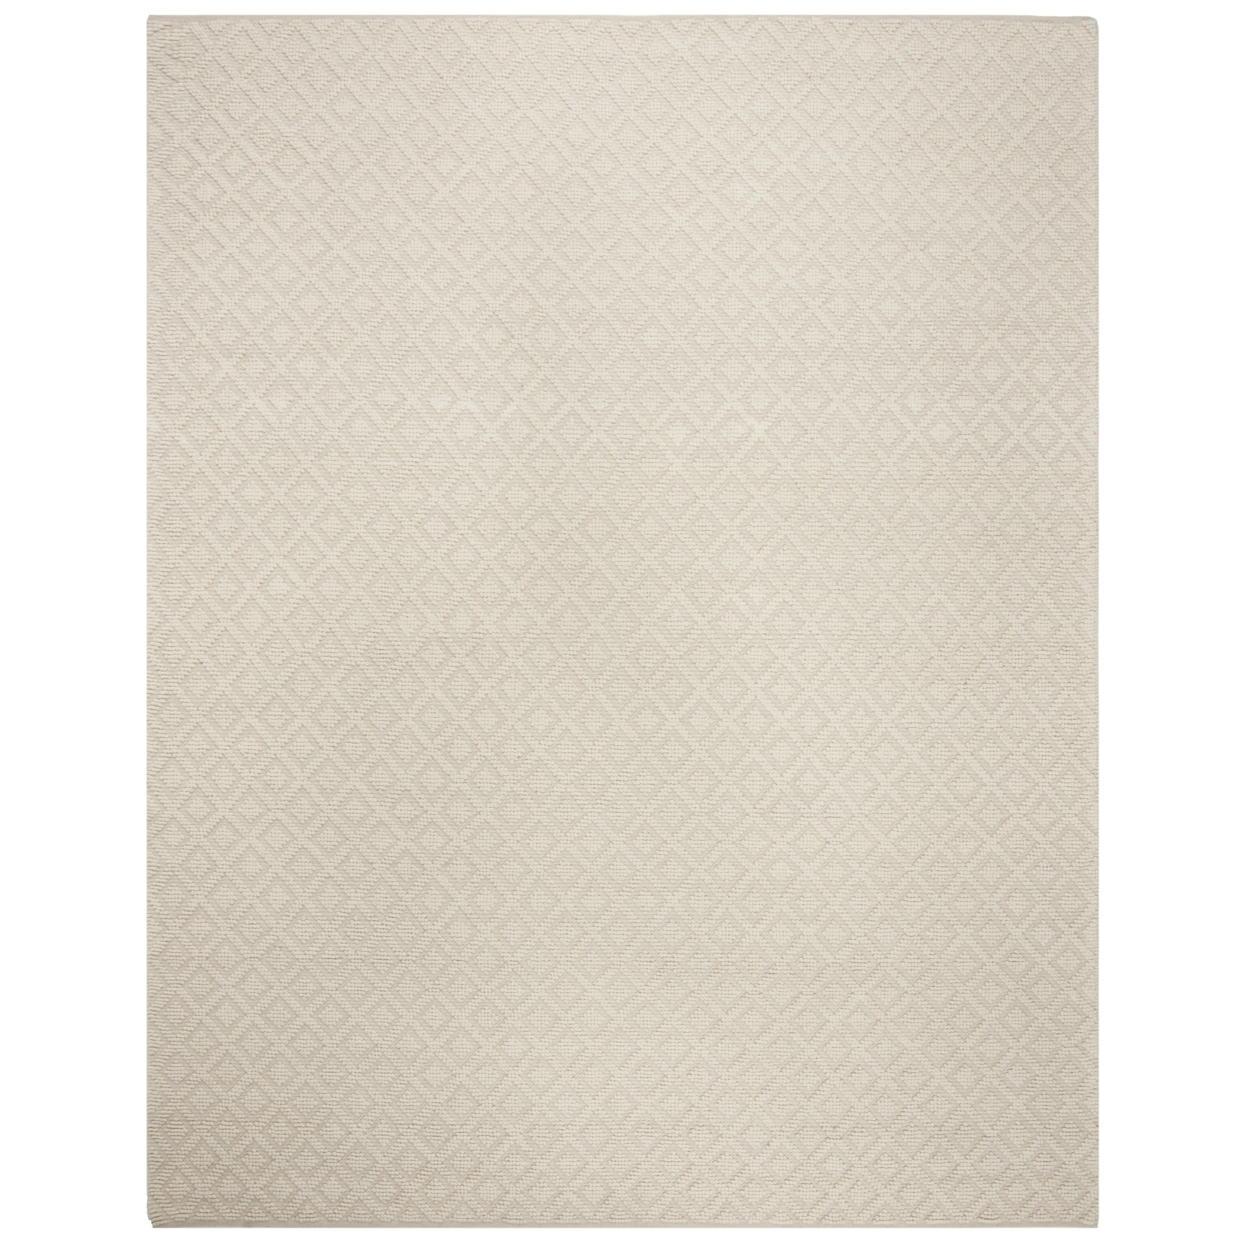 SAFAVIEH Vermont Collection VRM104A Handwoven Ivory Rug - 8 X 10